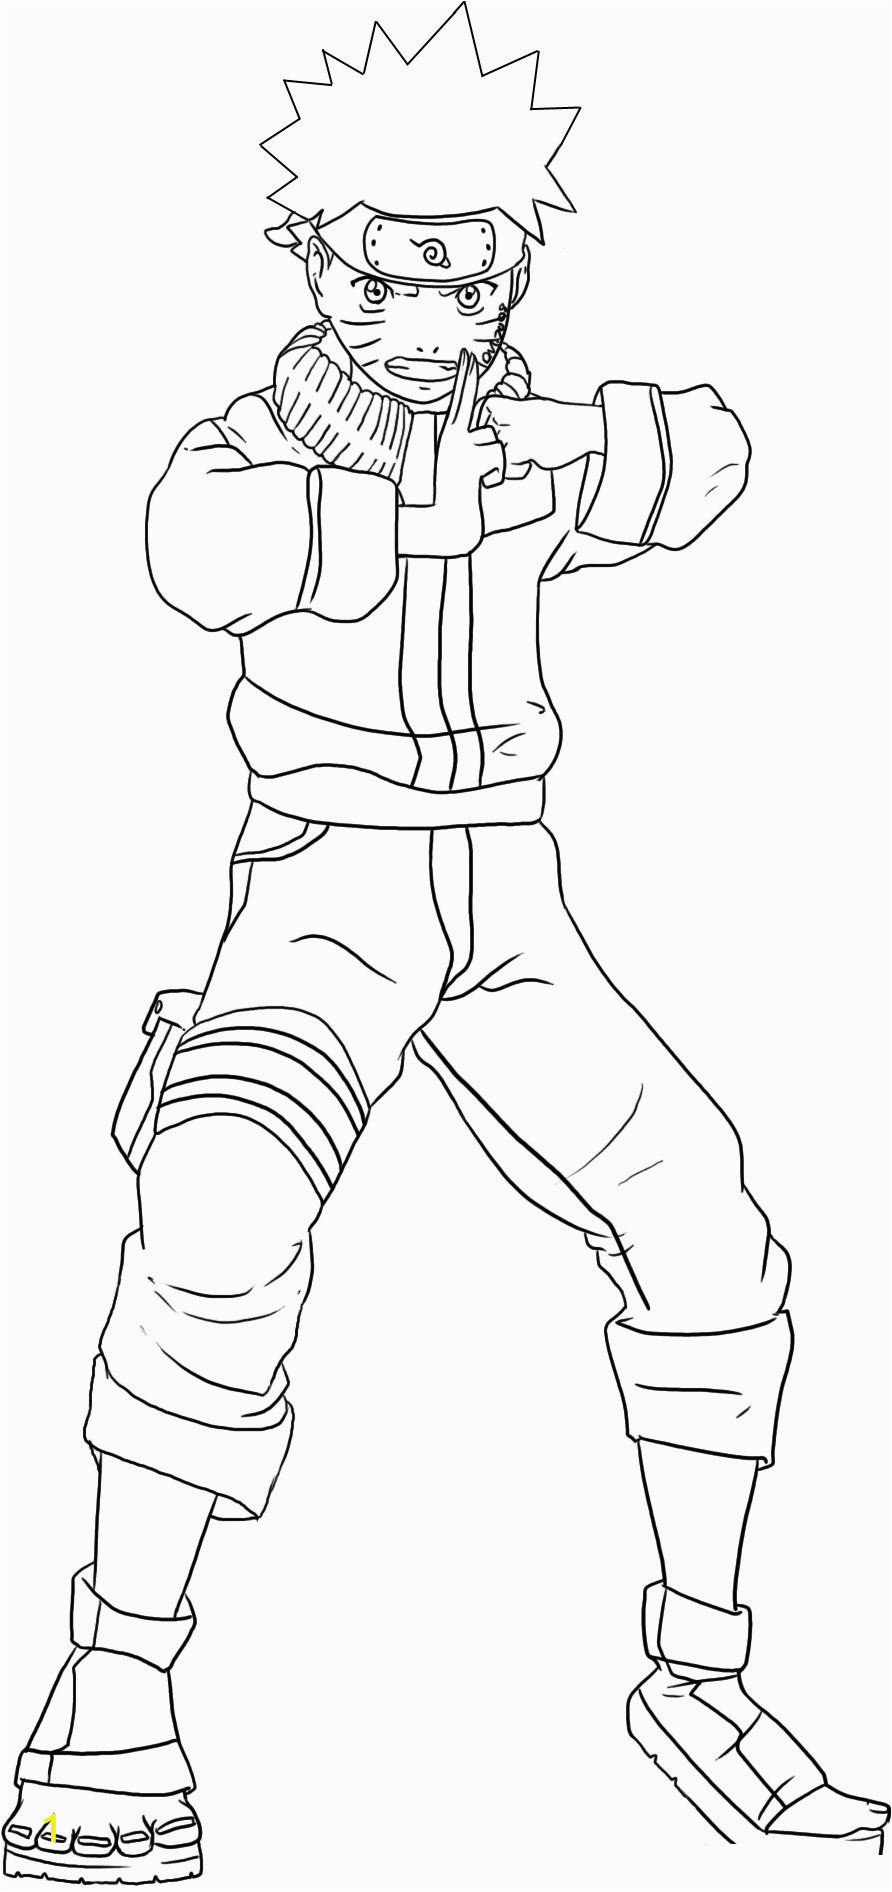 Naruto Shippuden Coloring Pages to Print Free Printable Naruto Coloring Pages for Kids